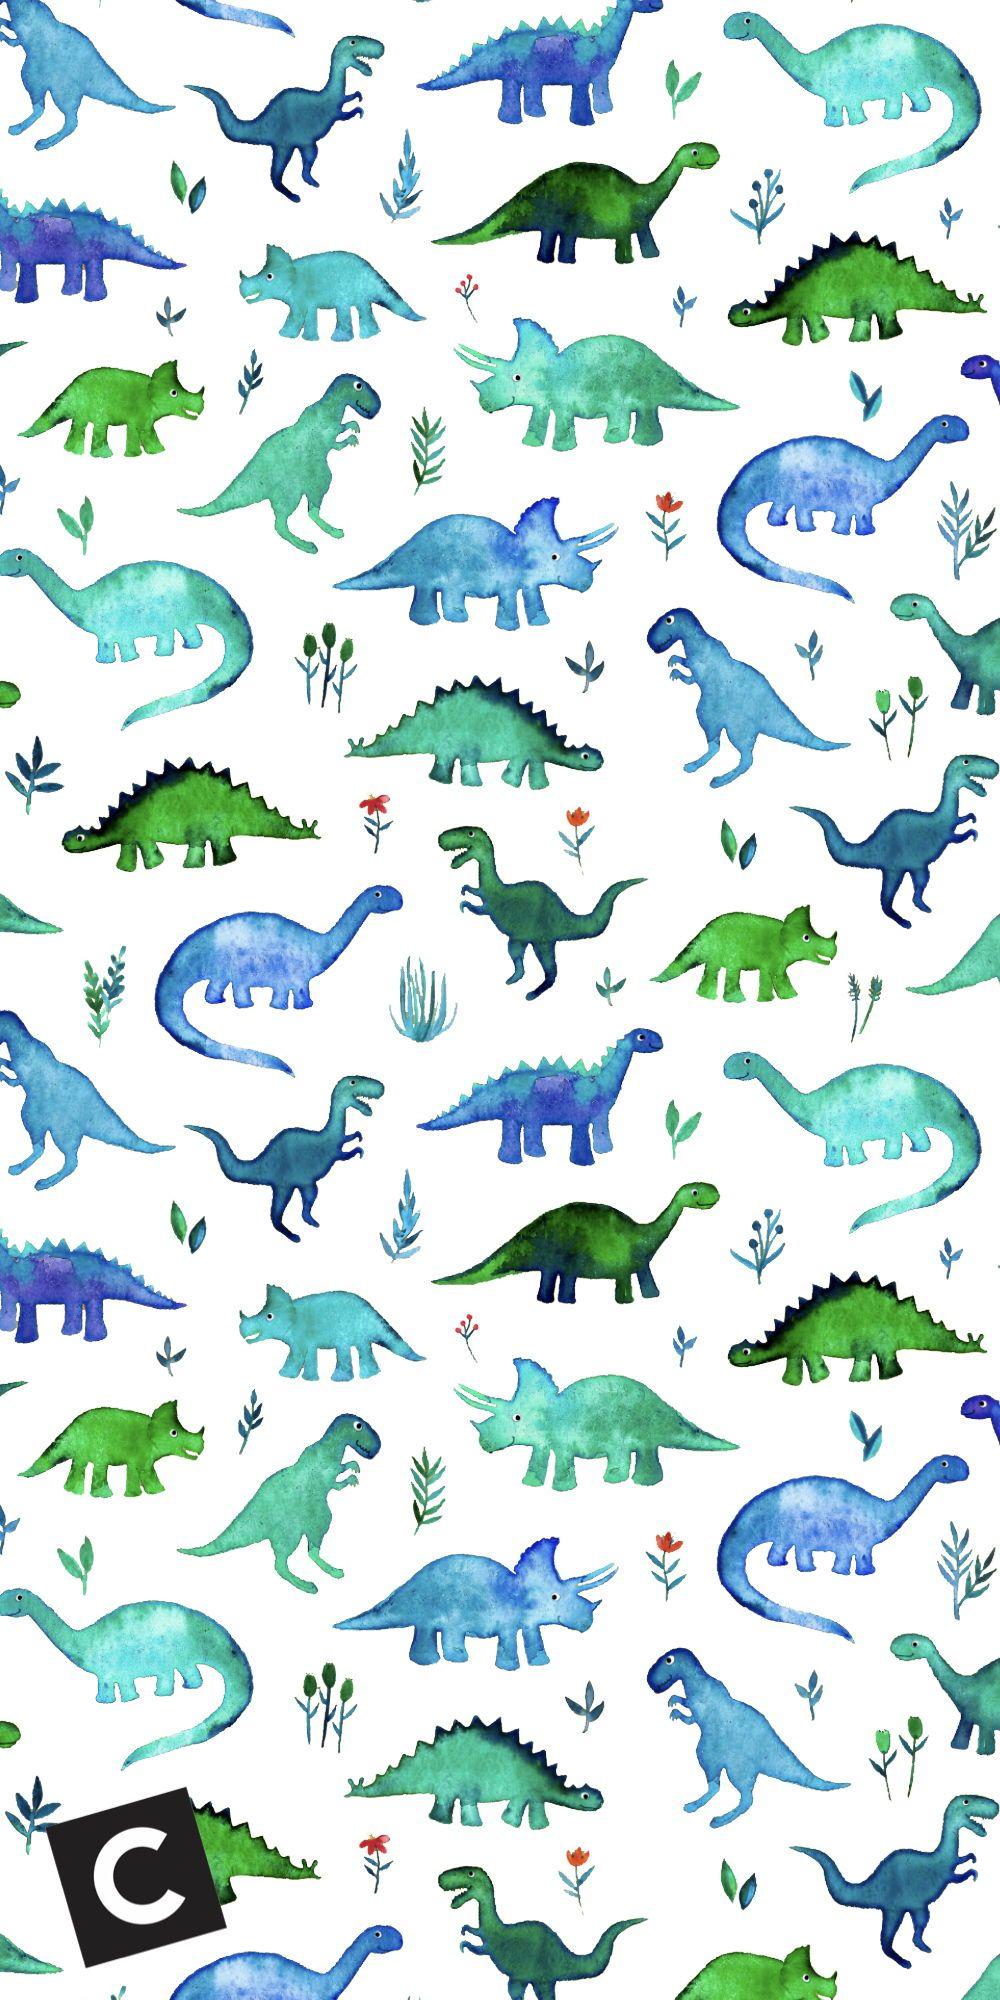 Dinosaur Aesthetic Wallpapers - Top Free Dinosaur Aesthetic Backgrounds